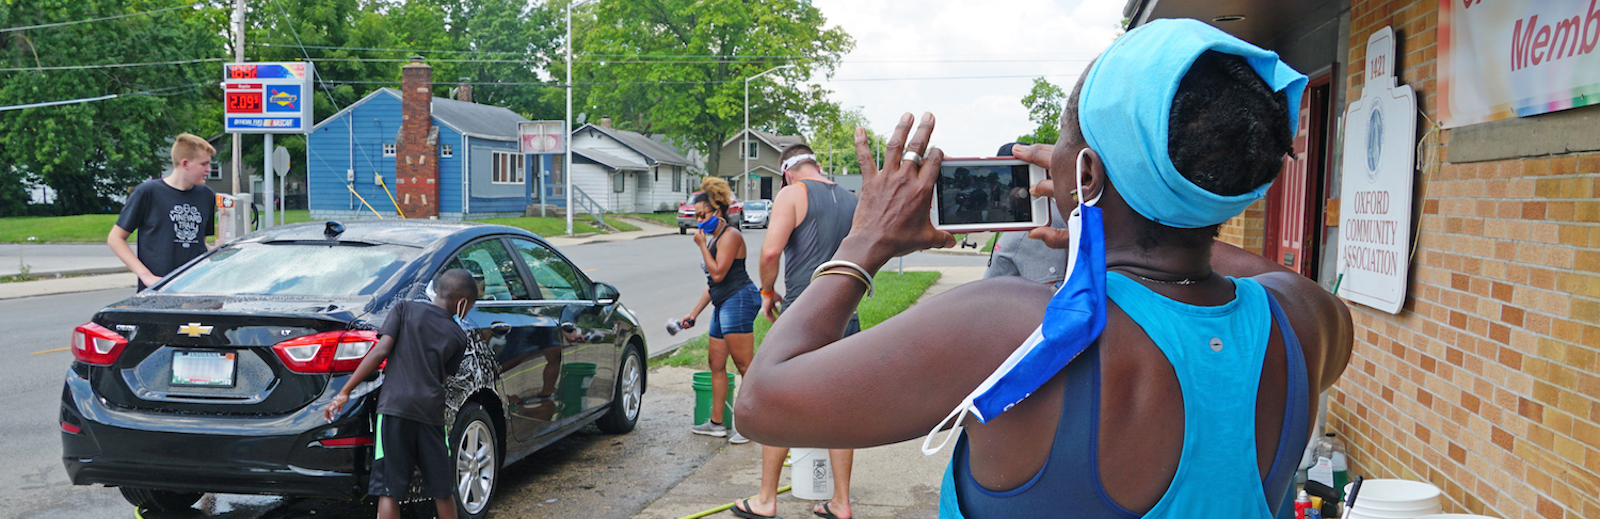 The Oxford Community Association hosted a car wash and membership drive on July 25, 2020, to support its neighborhood.